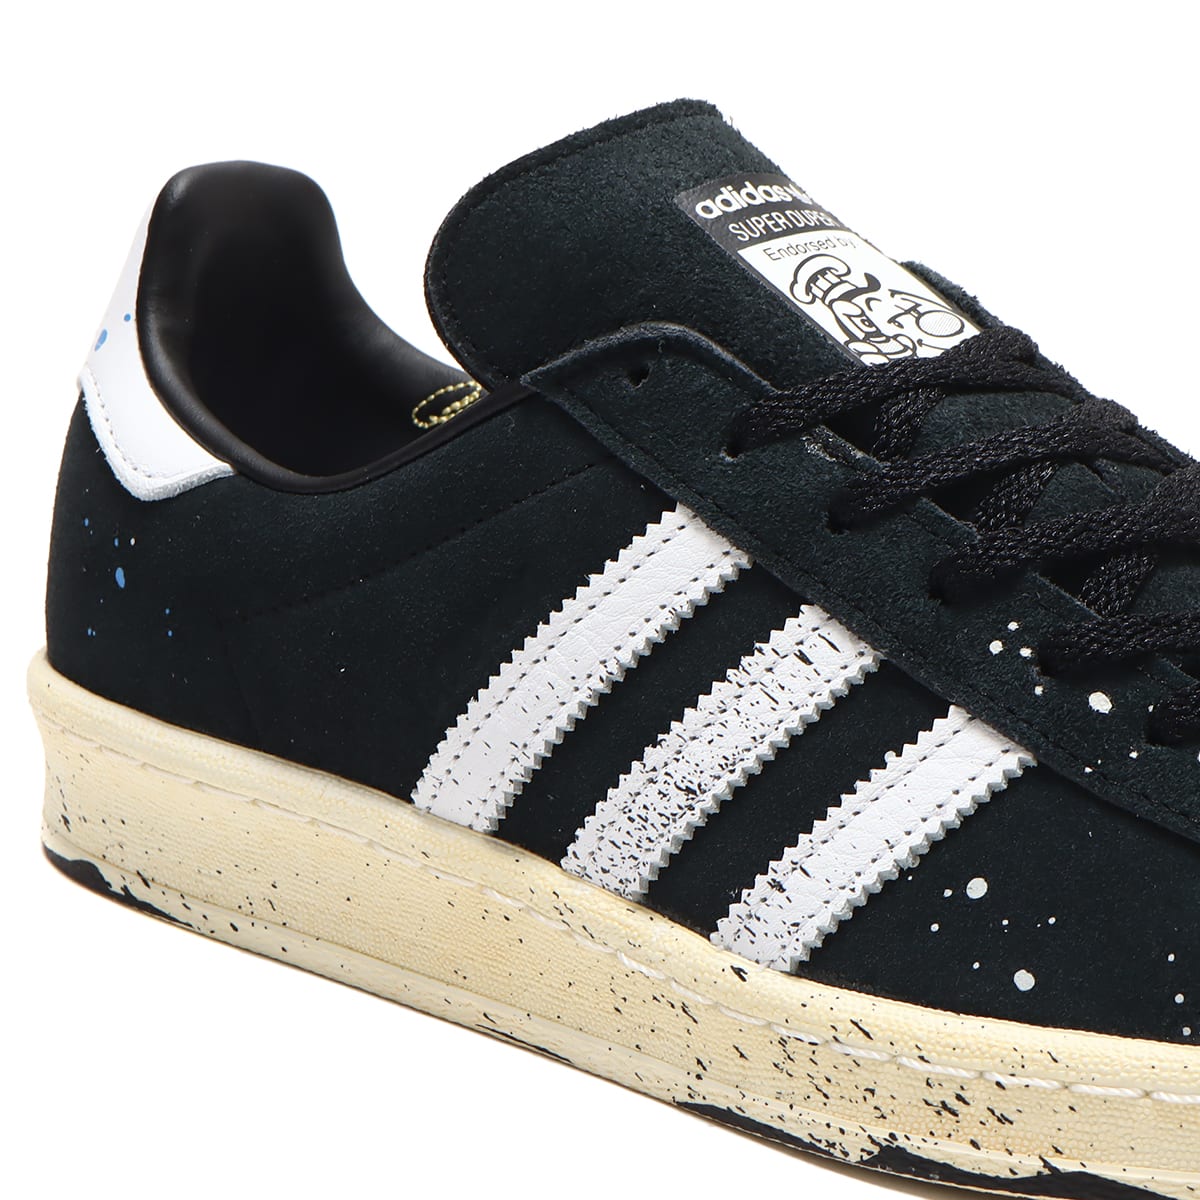 adidas CAMPUS 80s COOK CORE BLACK/FOOTWEAR BLUE 22SS-S